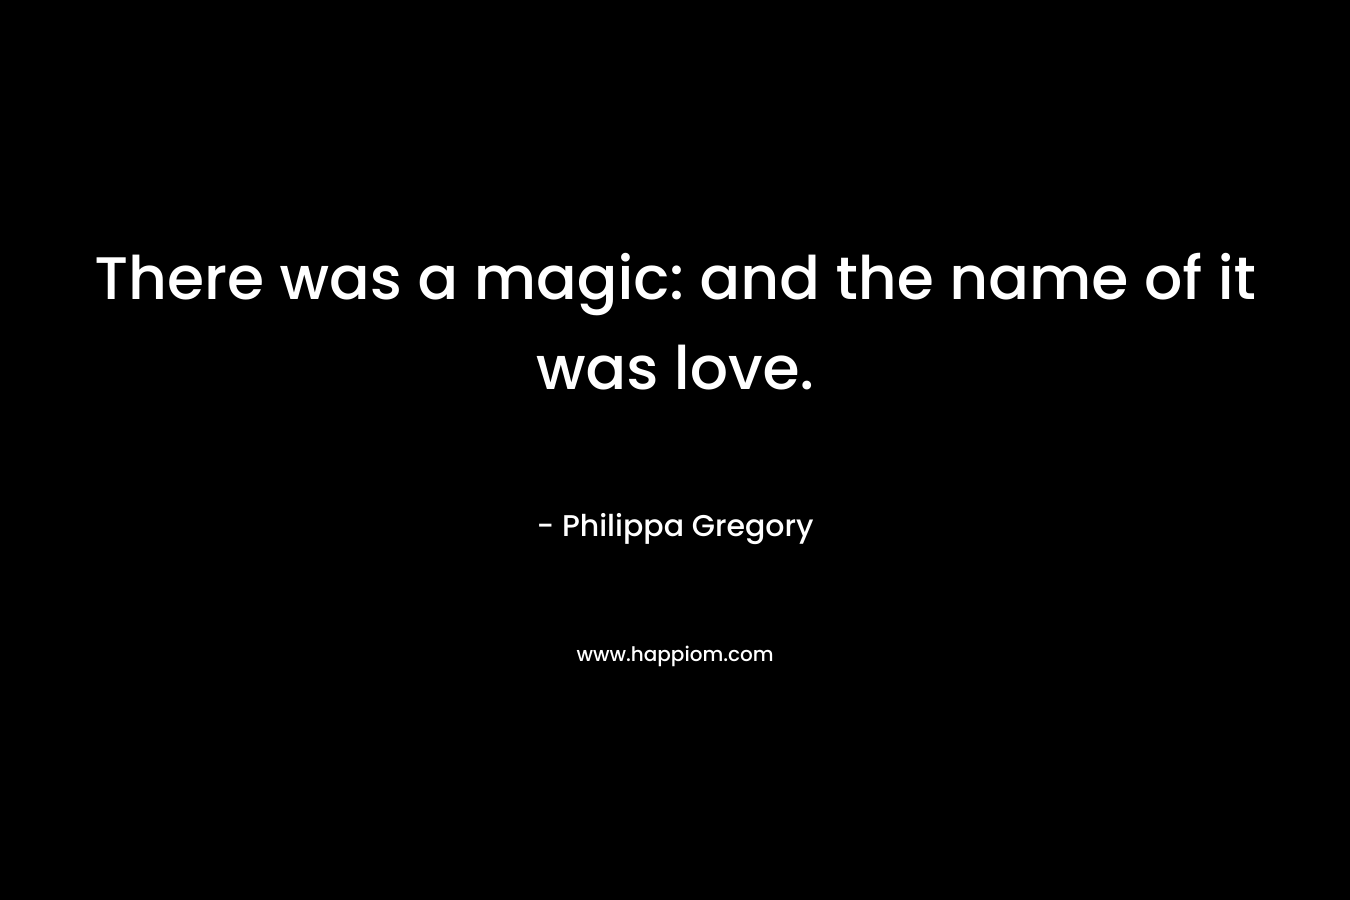 There was a magic: and the name of it was love.